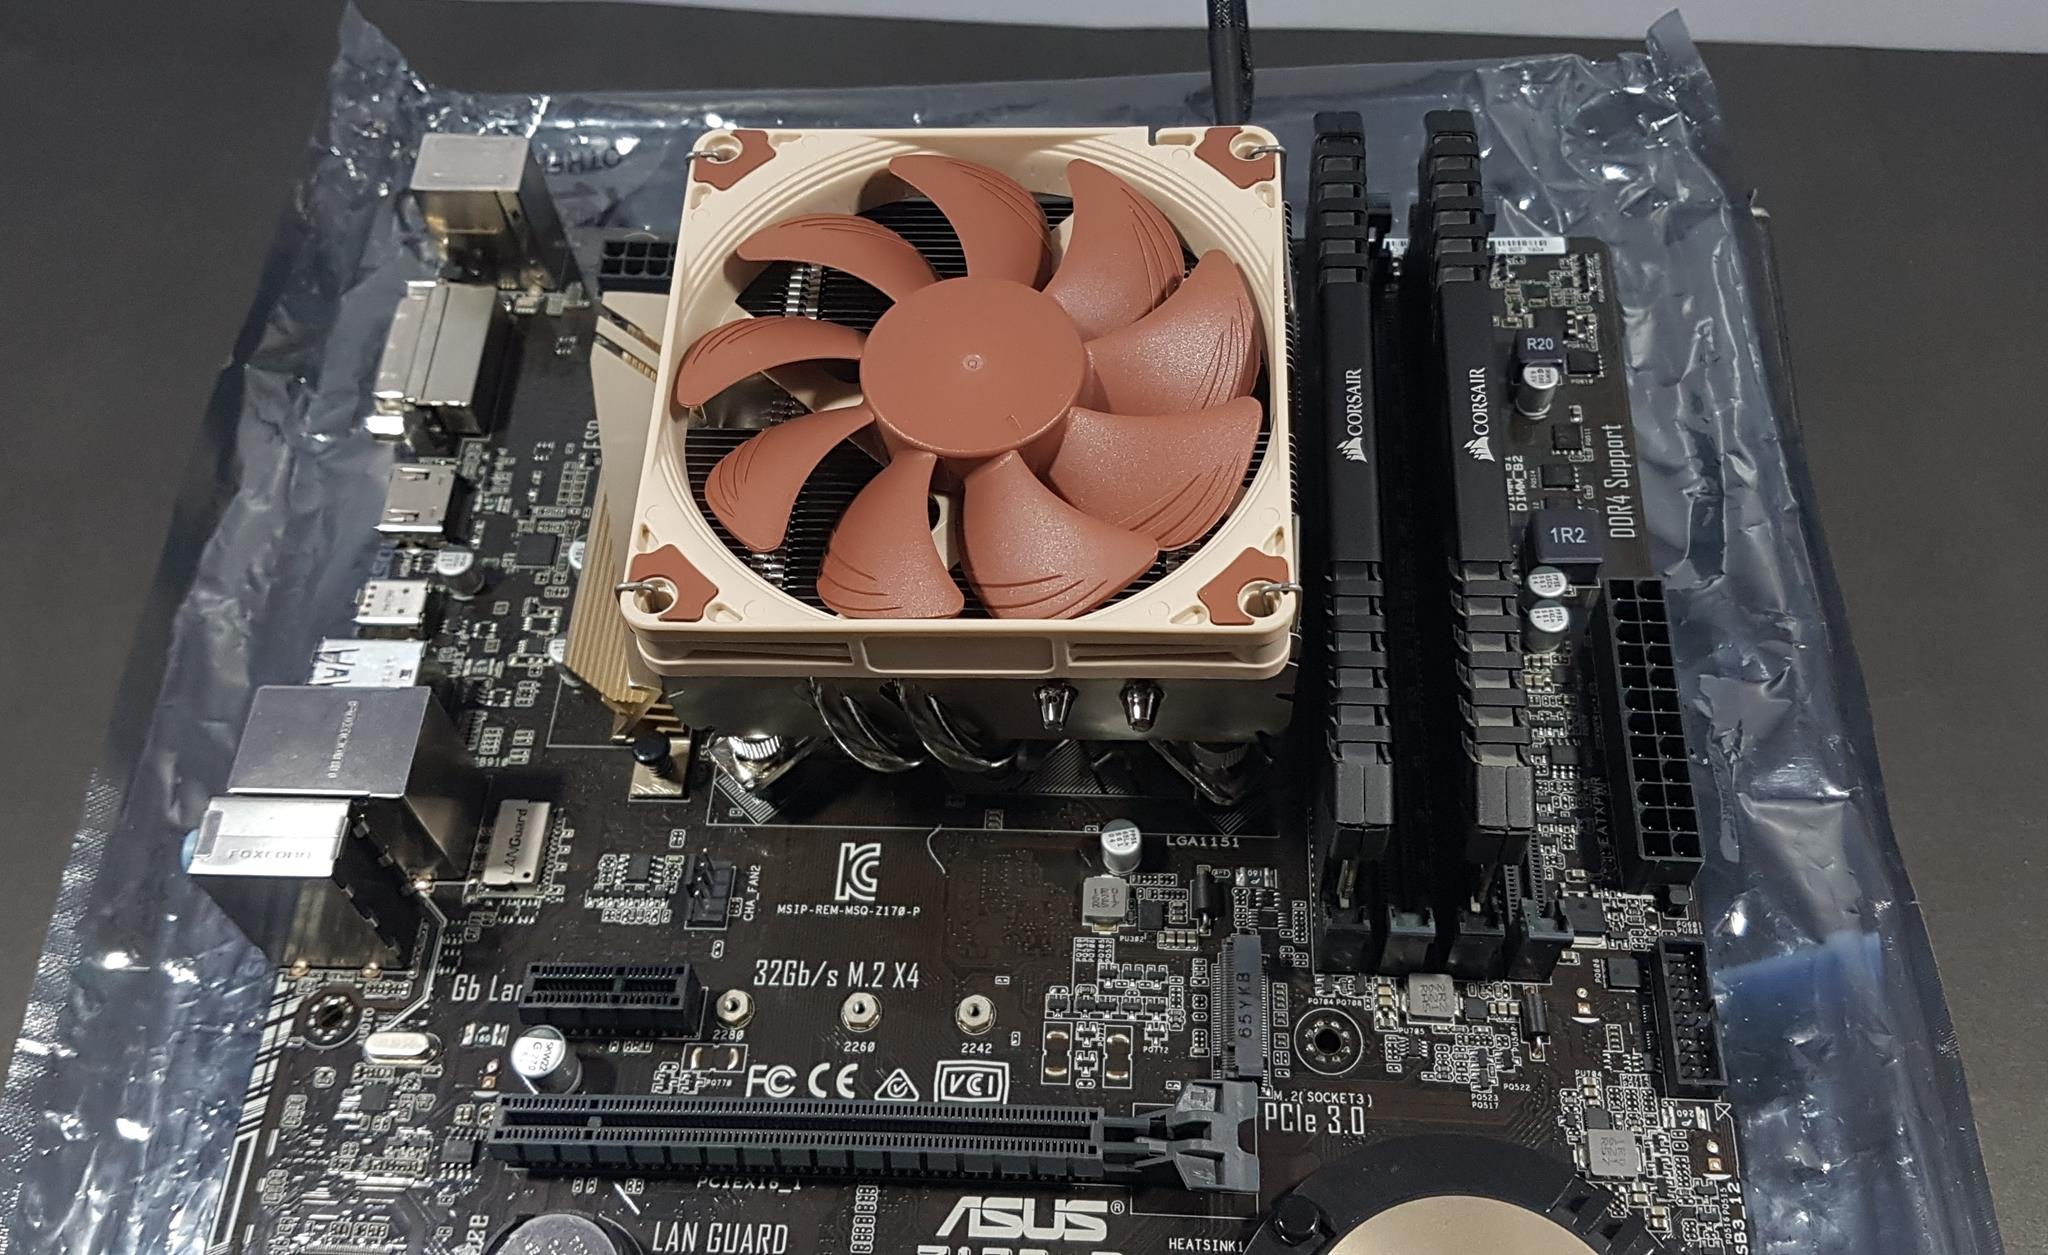 Noctua NH-L9x65 65mm tall Compact, Low-Profile CPU Cooler Review